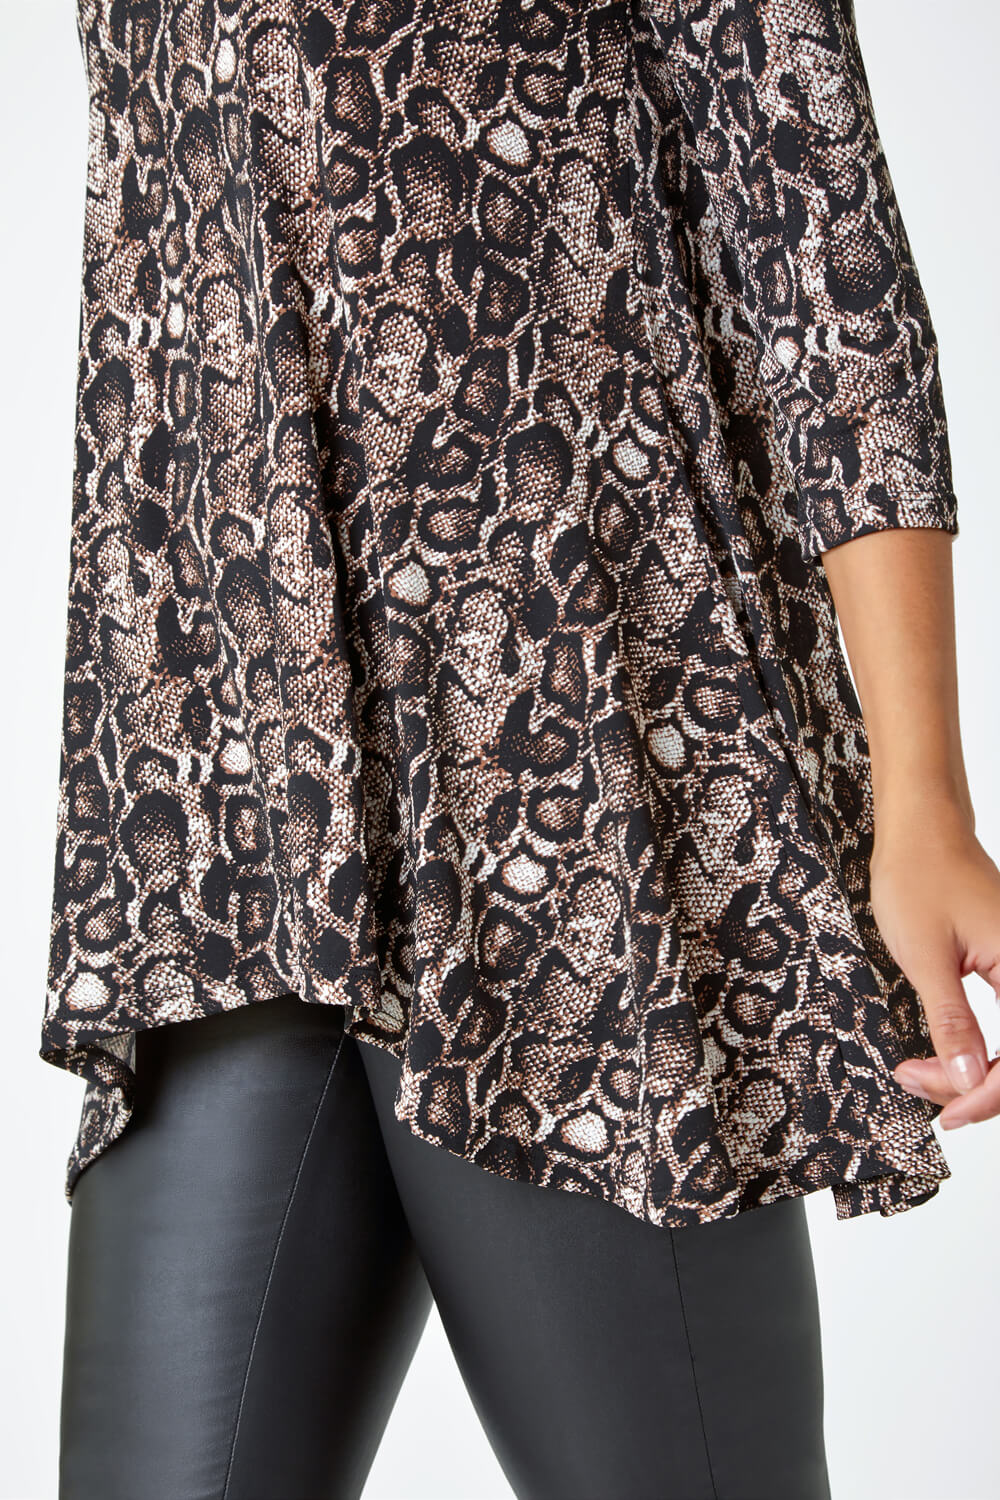 Coffee Animal Print Swing Stretch Top, Image 5 of 5